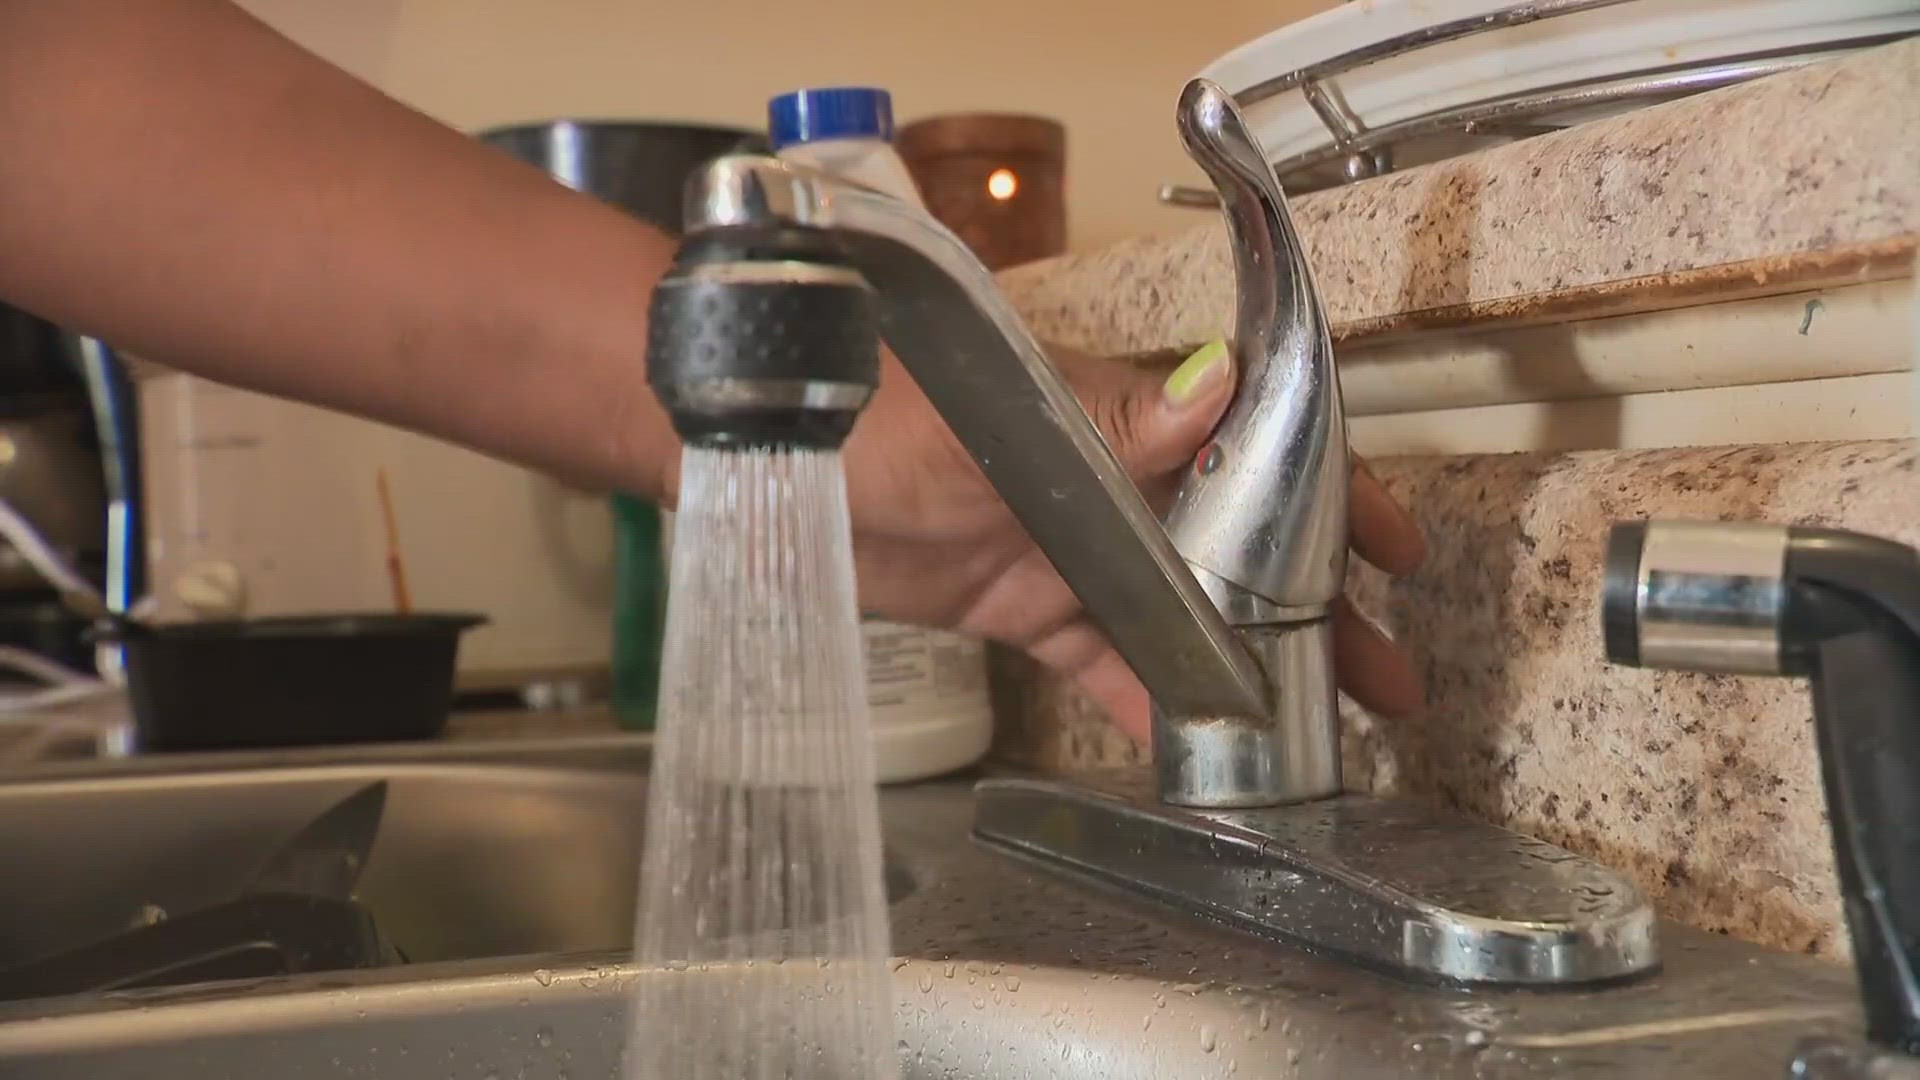 The City of Phoenix's water rate increase delivers a new message to homeowners: If you don't conserve water, you'll pay more.